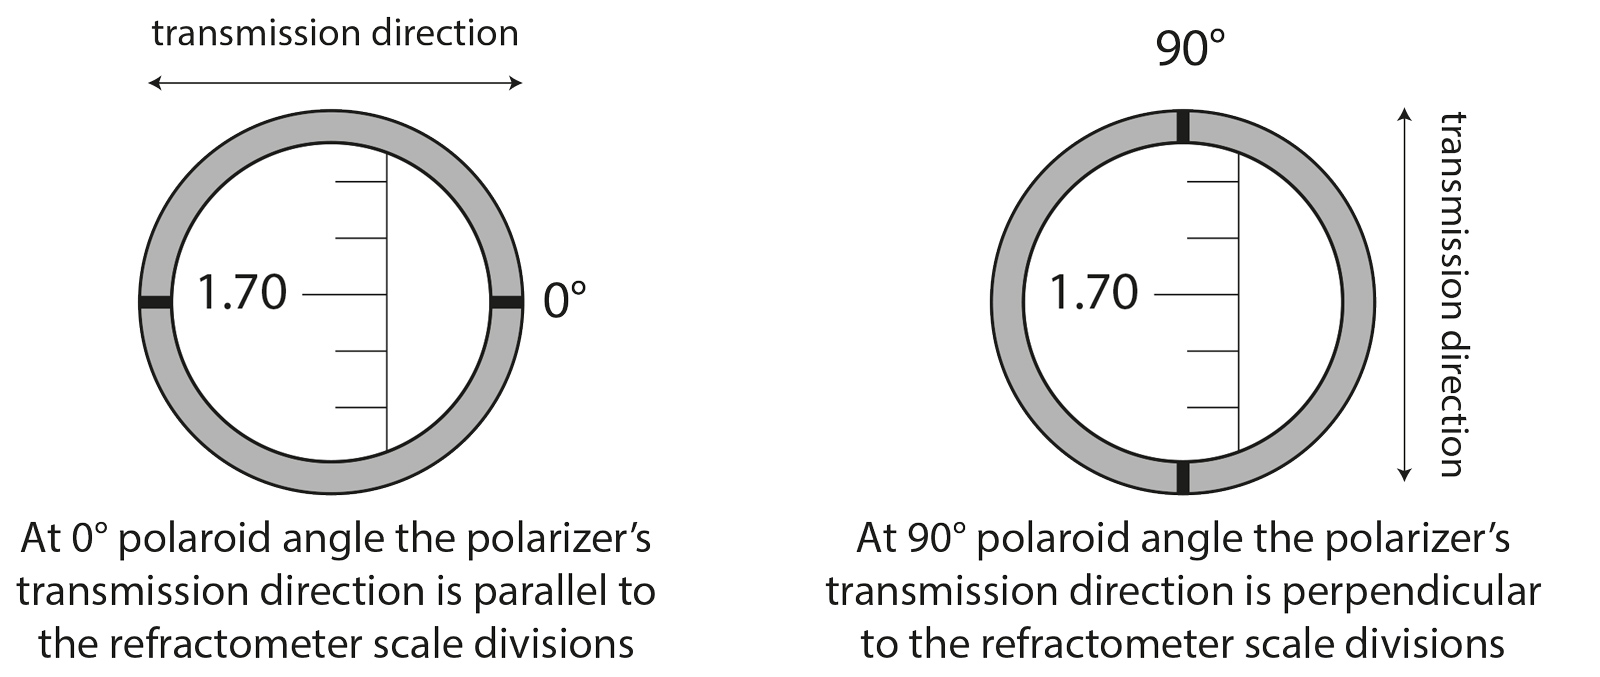 Figure 3. Use of the refractometer polaroid angle can help to determine both optic character and sign from any single facet on any stone. The 0° angle is when the transmission direction of the refractometer eyepiece polarizer is parallel to the scale divisions of the refractometer. One can easily determine the transmission direction of the eyepiece polarizer by rotating it in front of an LCD computer monitor and noting the direction of strongest light transmission. The edge of the filter than then be marked, as shown above. Illustration © Richard W. Hughes. Click on the figure for a larger example.